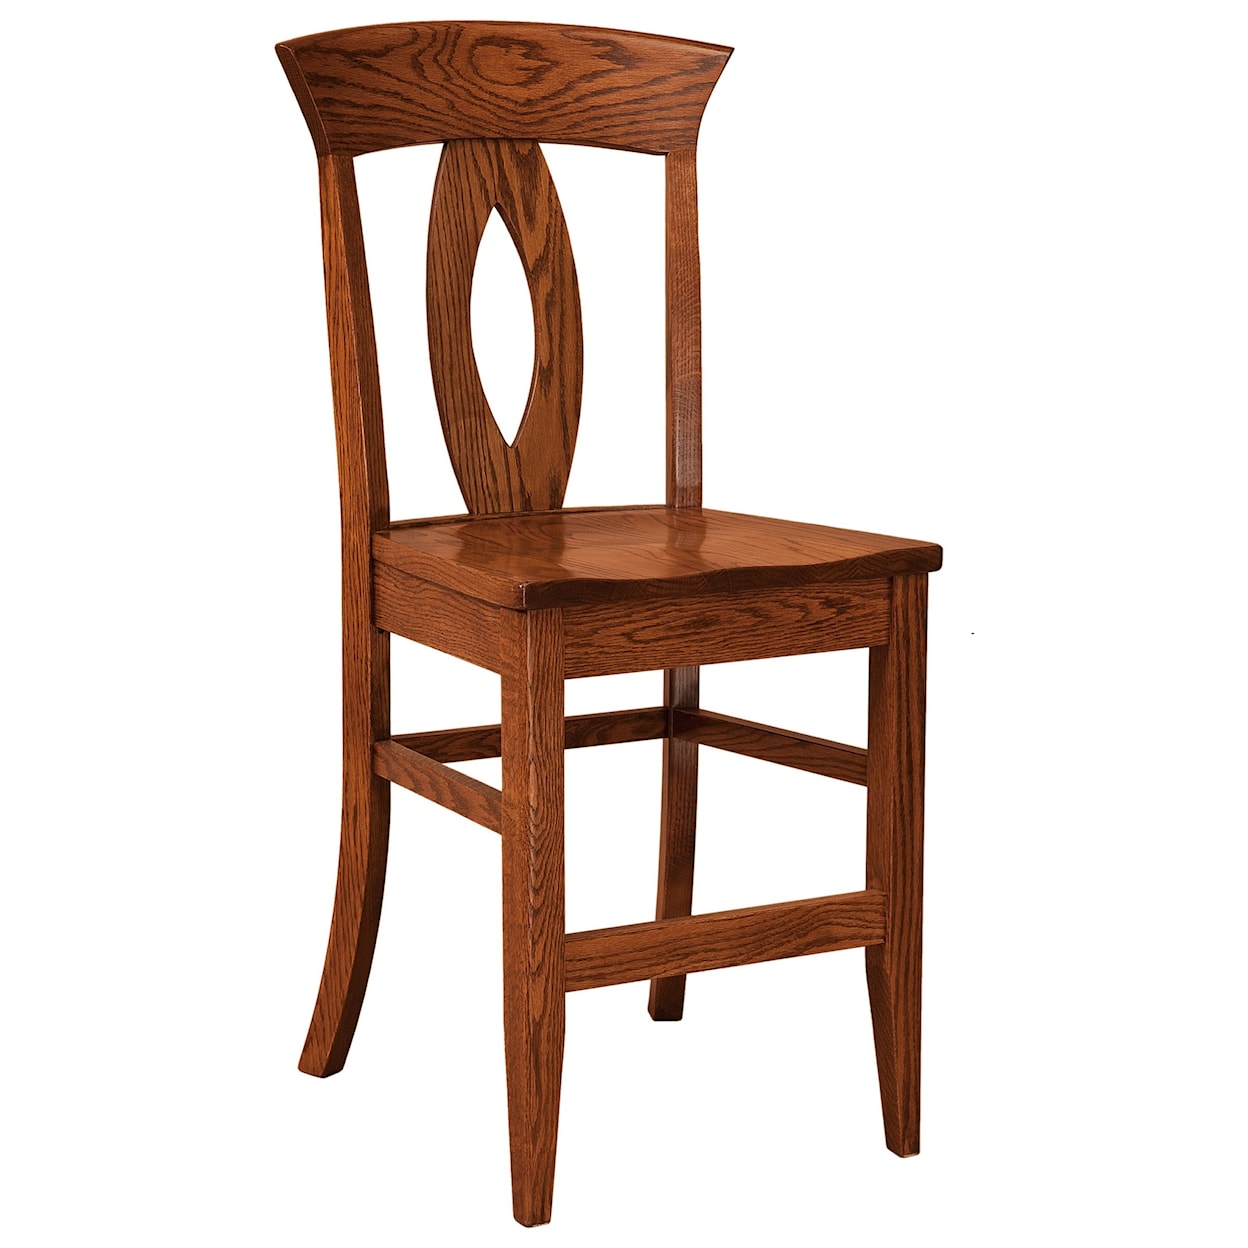 F&N Woodworking Brookfield Stationary Counter Height Stool - Wood Seat